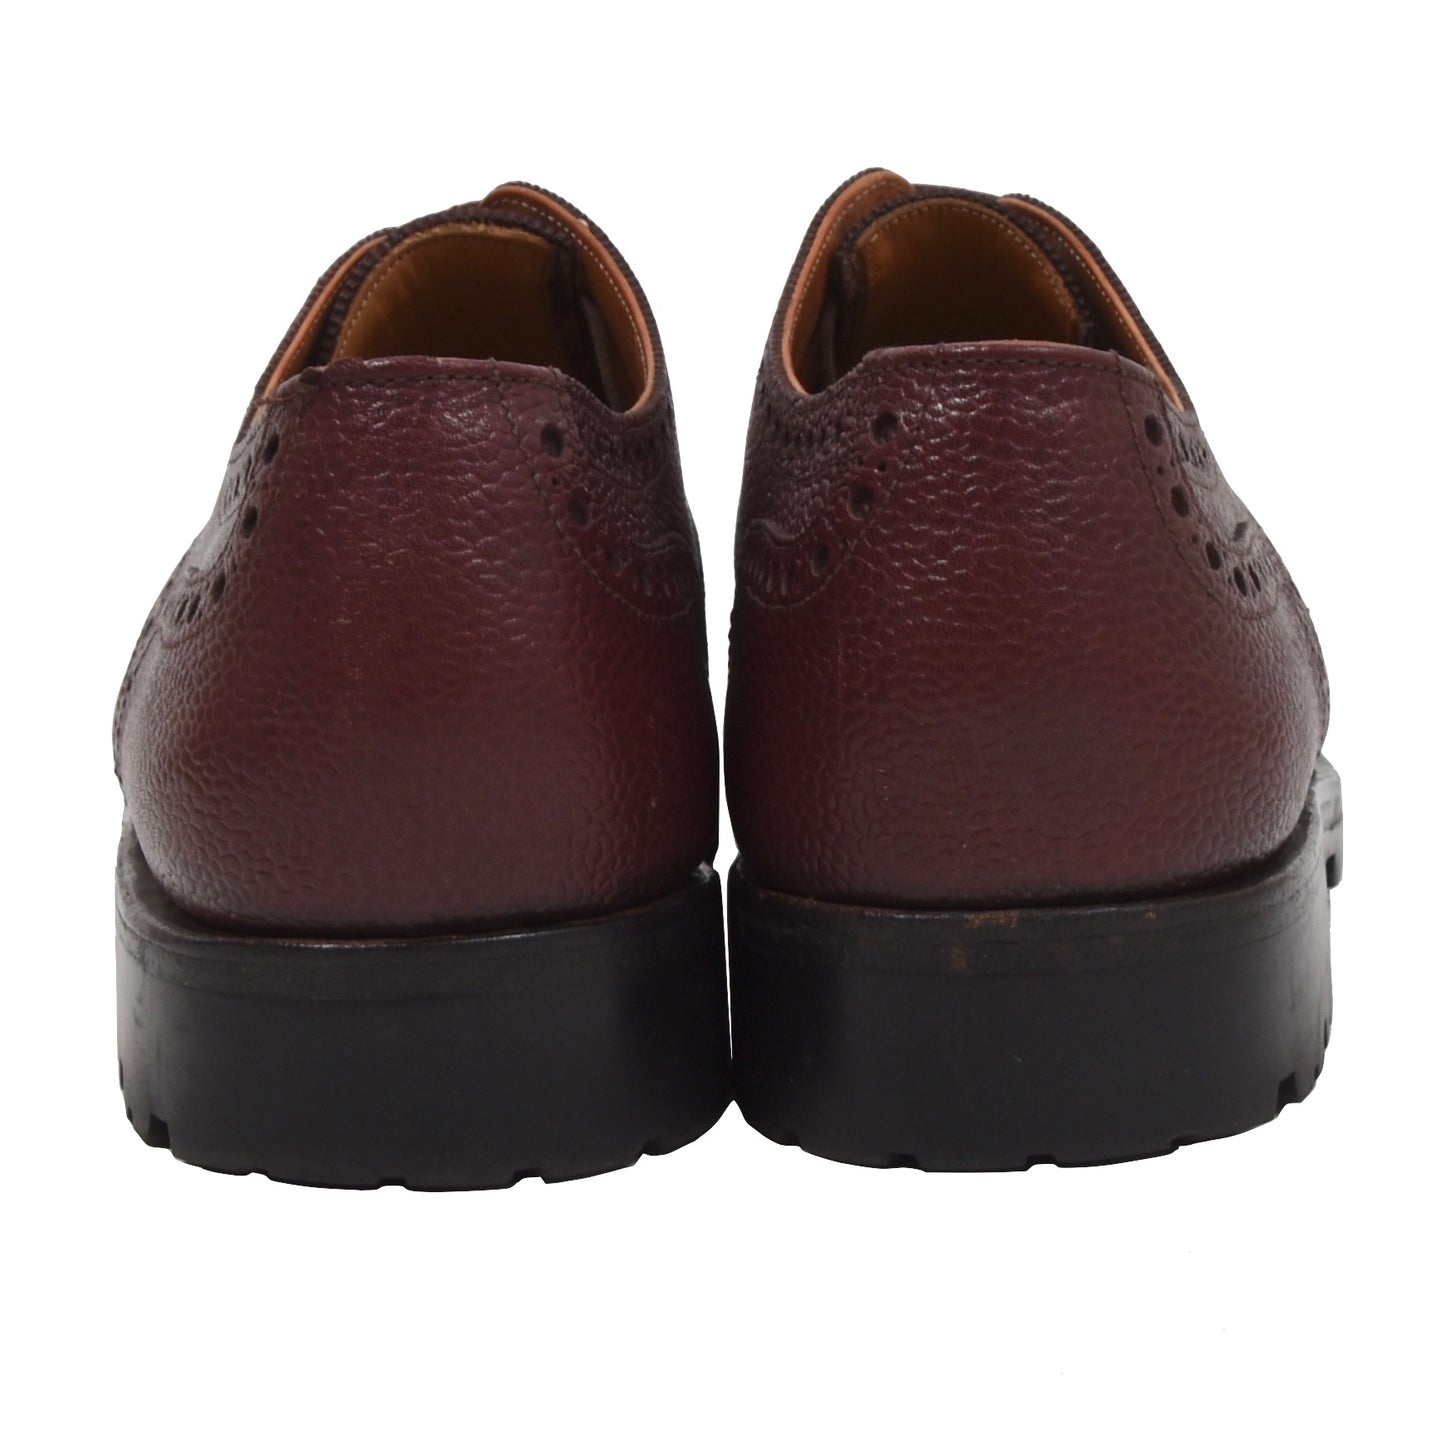 Ludwig Reiter Cap Toe Derby Shoes Size 9.5 - Burgundy